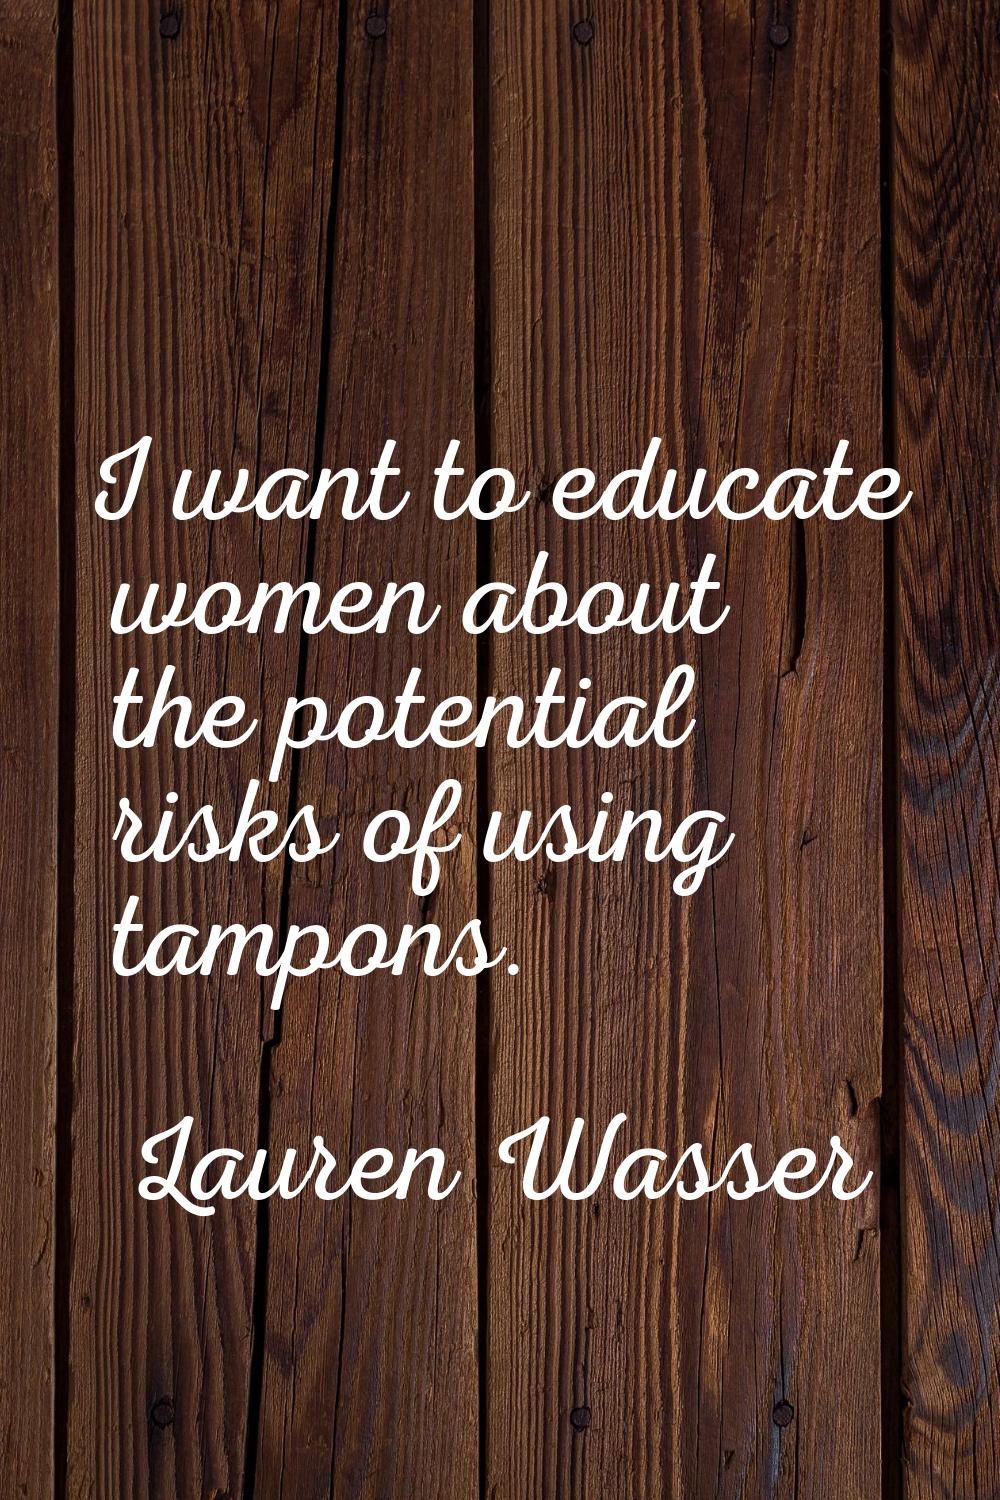 I want to educate women about the potential risks of using tampons.